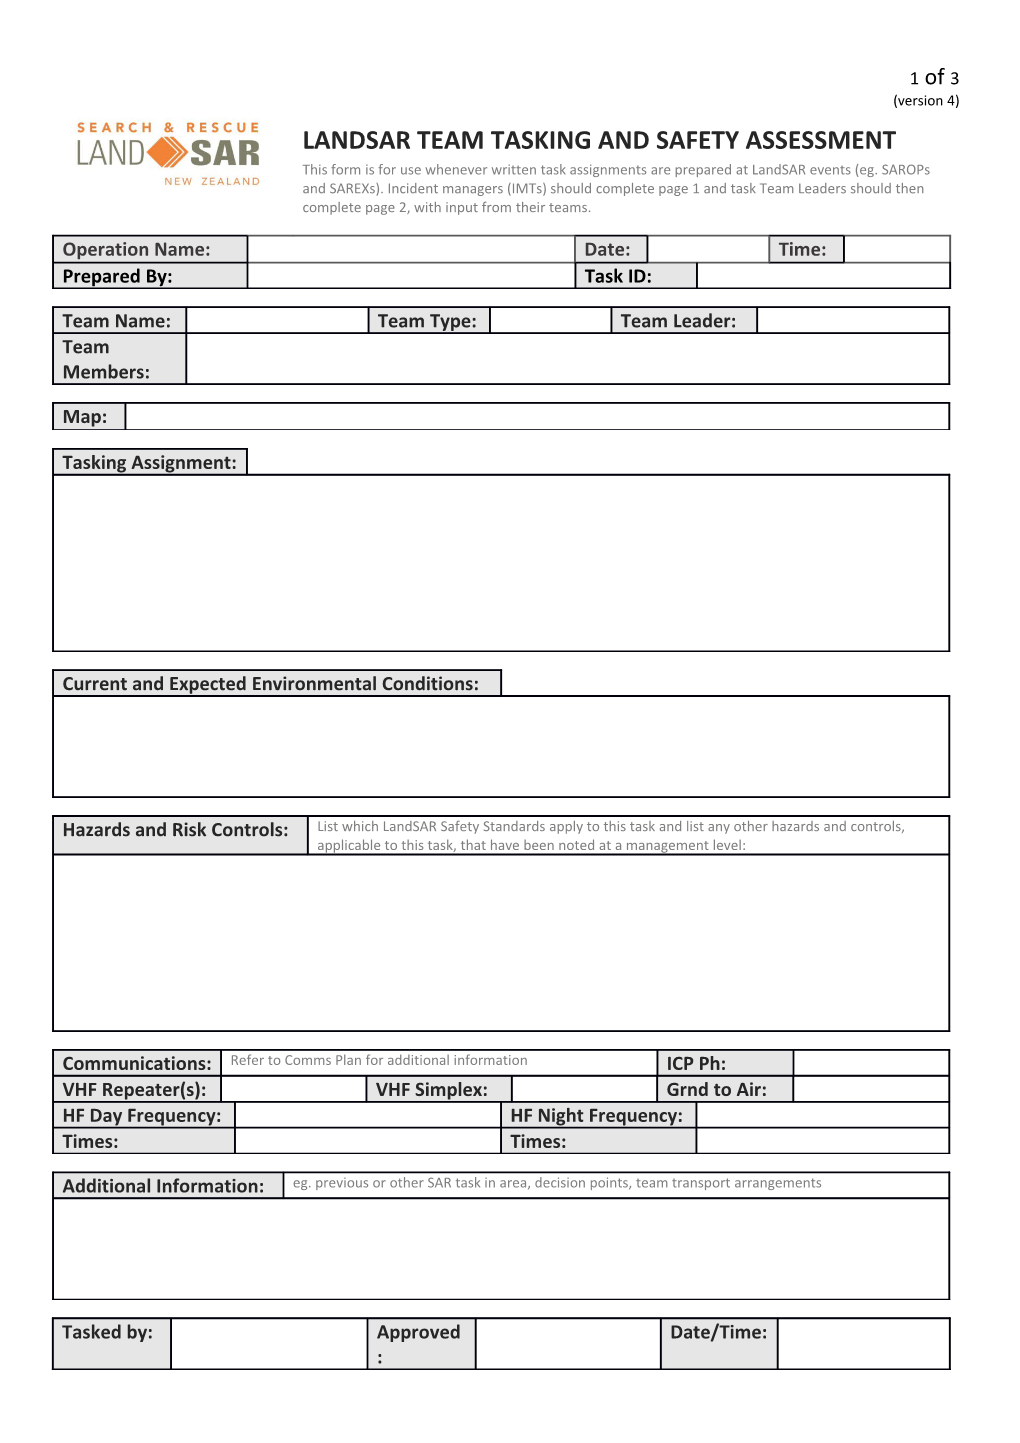 The Team Leader Must Sign This Form and Carry It During the Task (Return It to the IMT